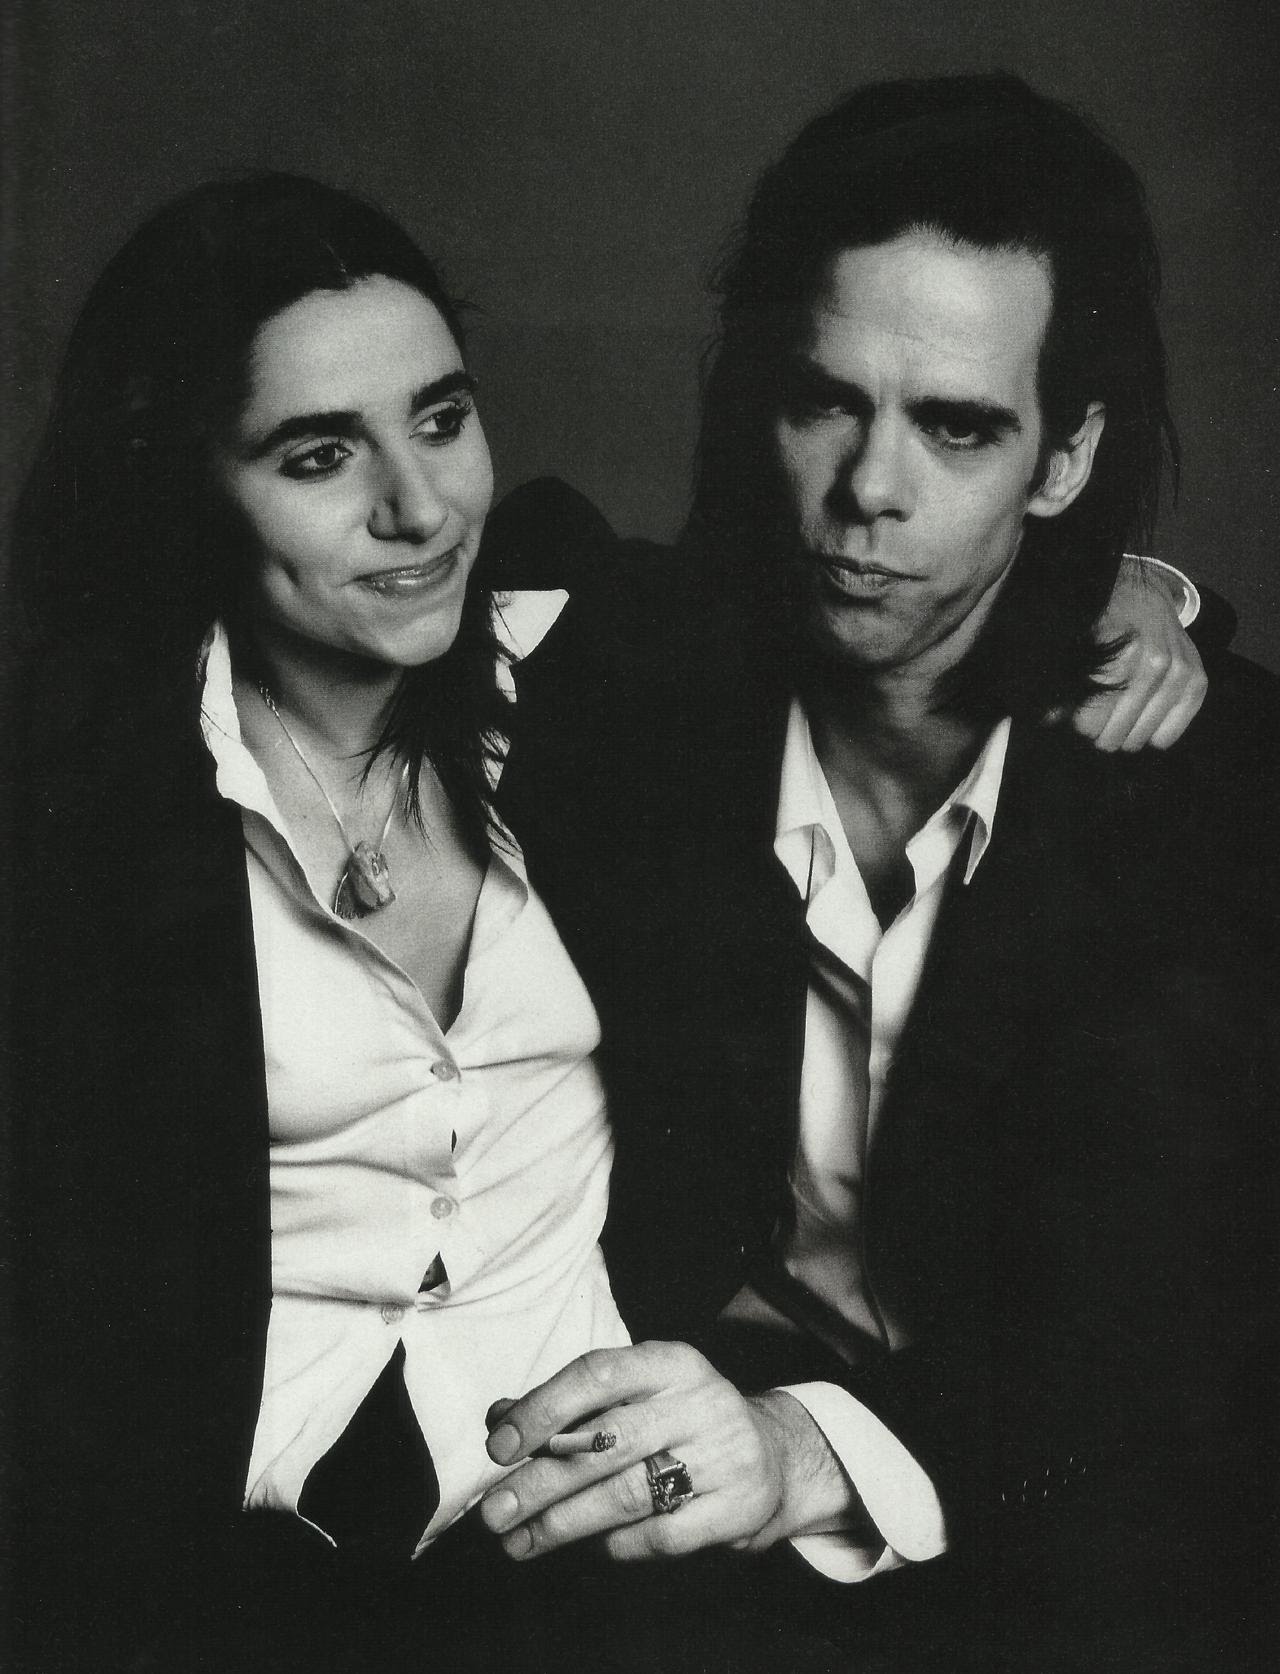 Nick Cave And The Bad Seeds Pics, Music Collection